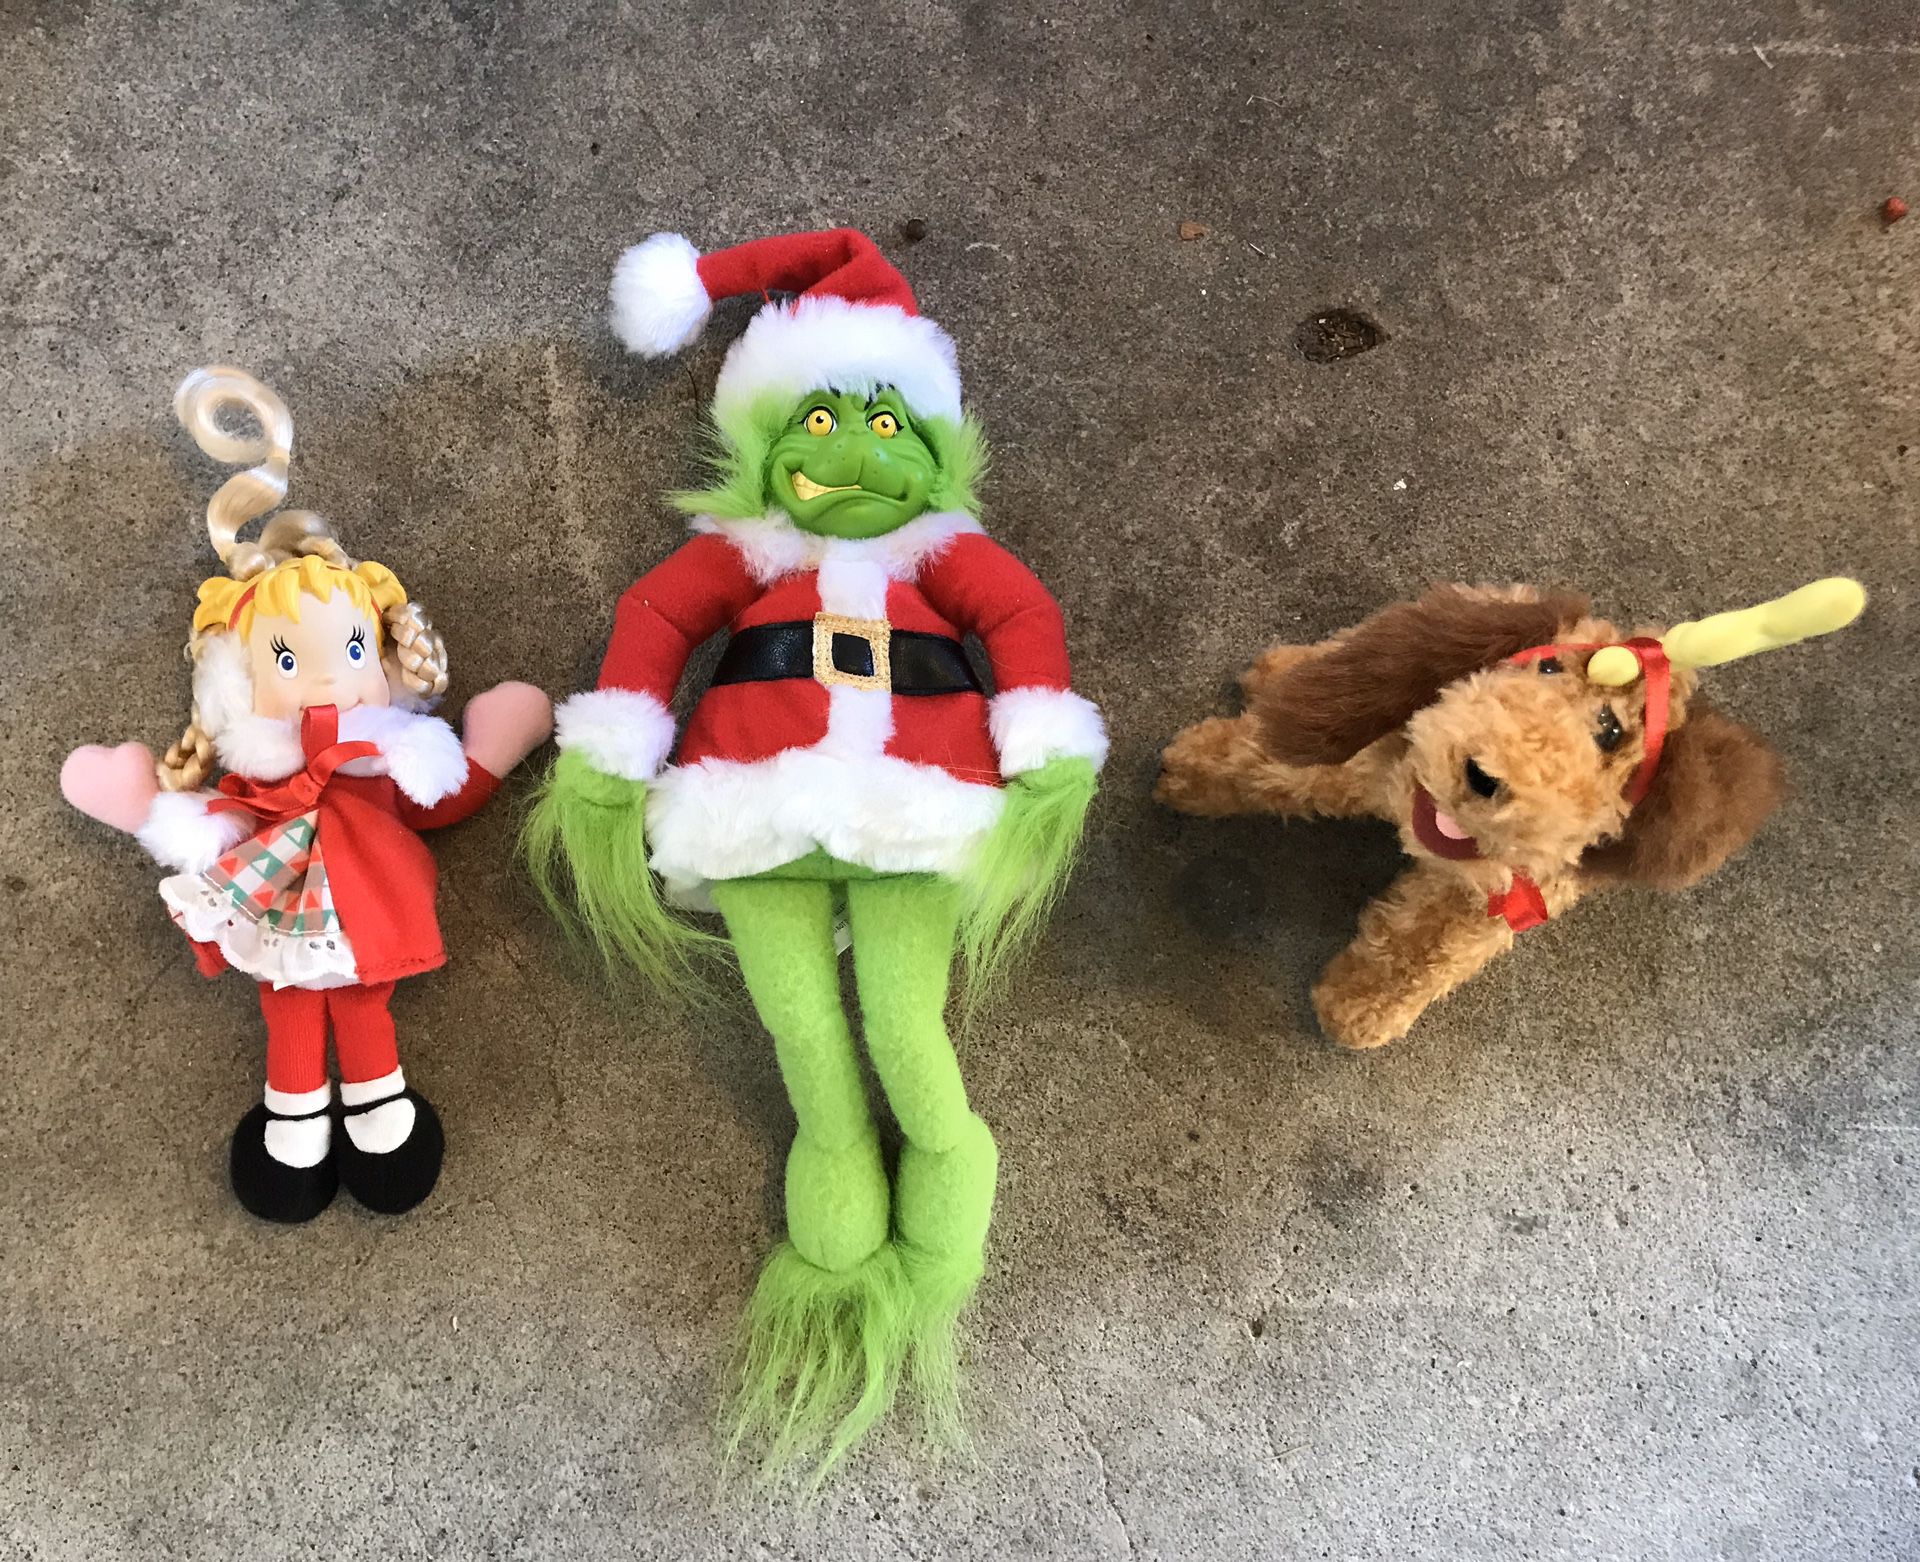 Plush Grinch, Max and Cindy Lou Who set